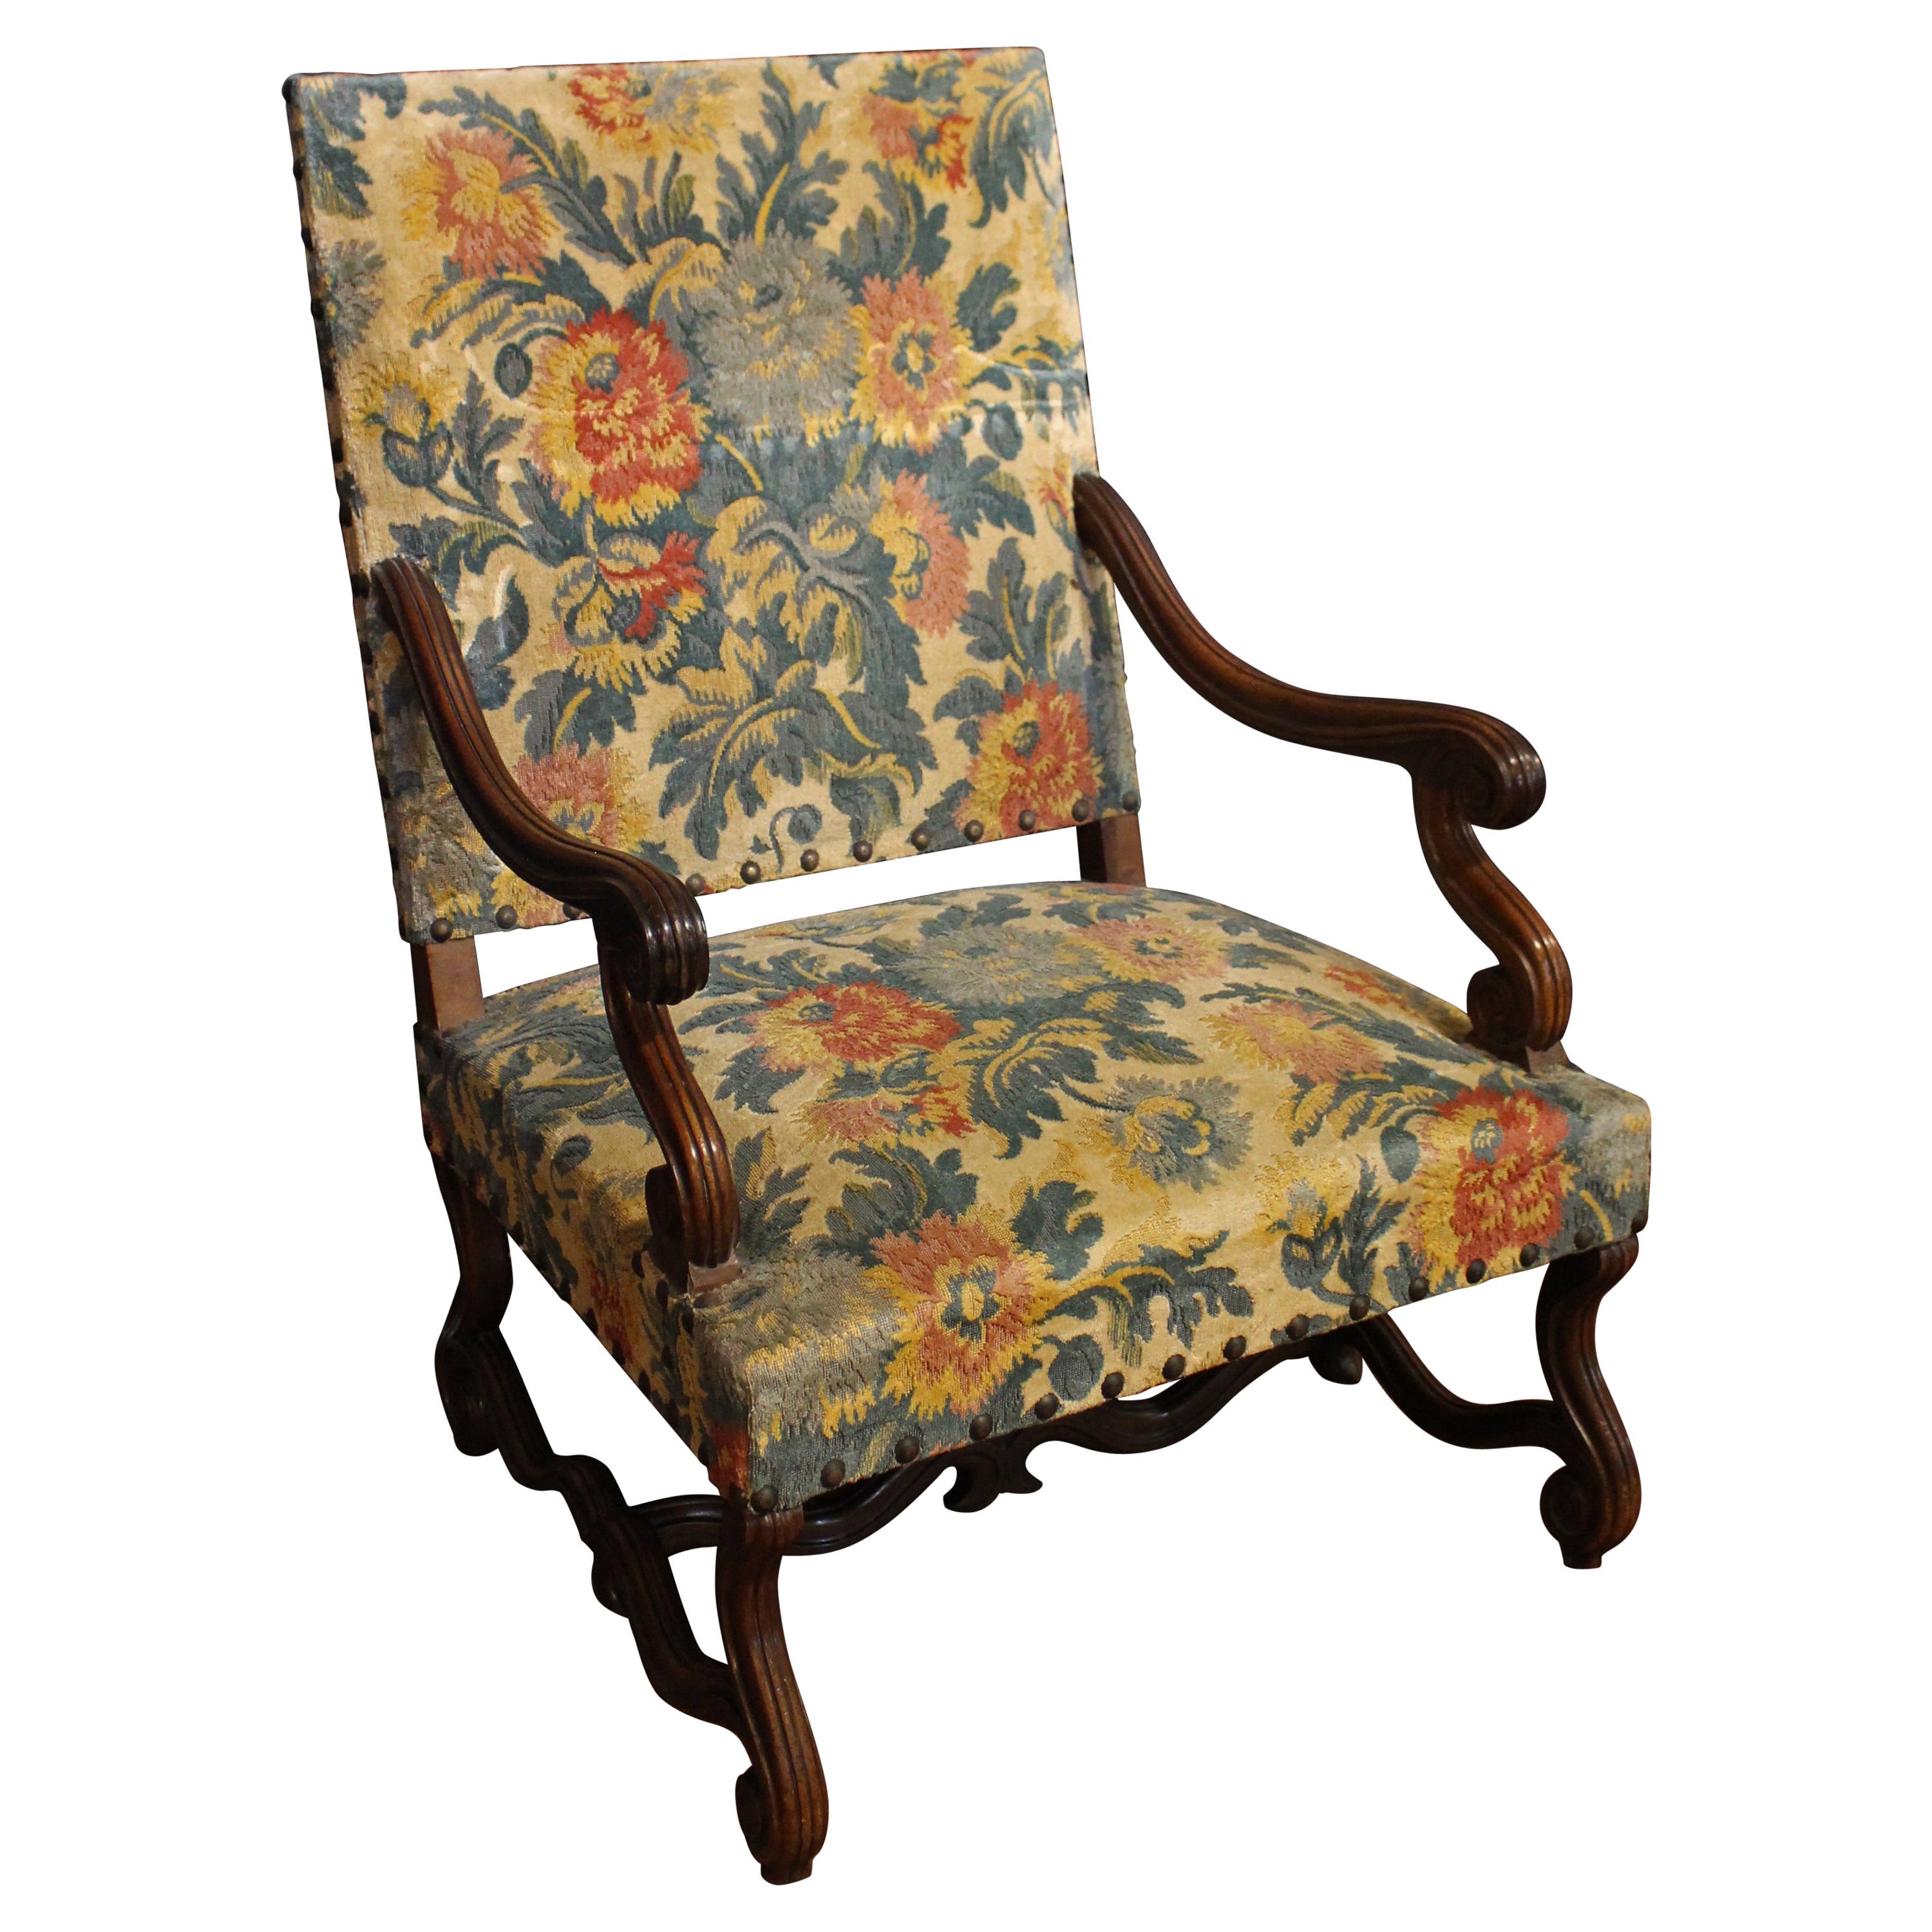 Circa 1870 French Grand Scale Regence Style Fauteuil